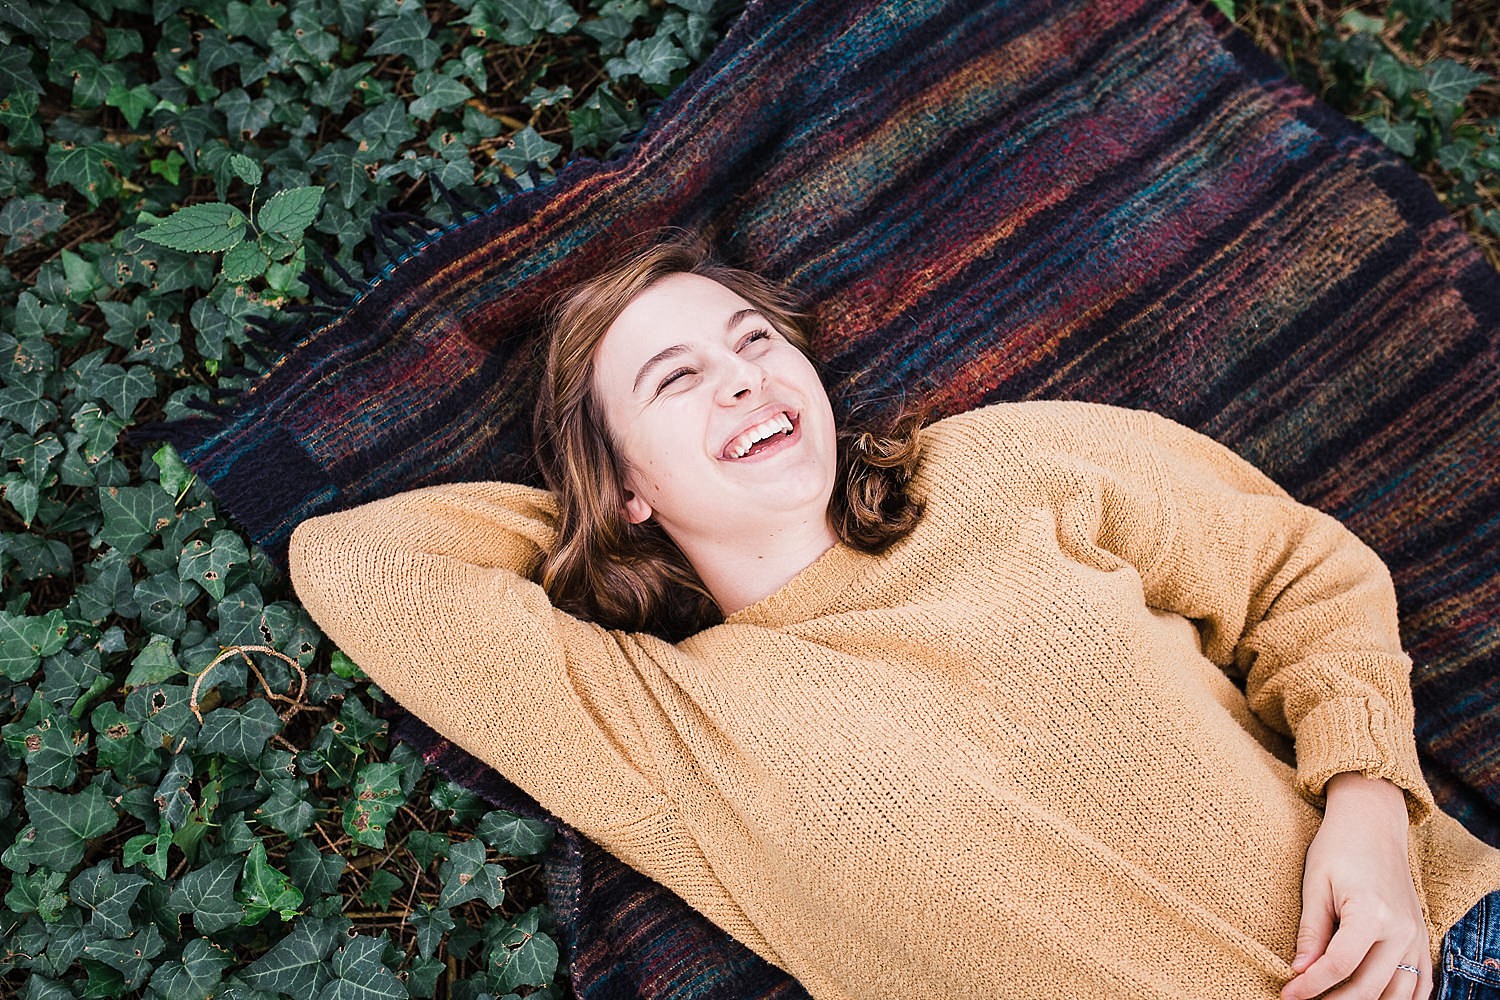  Lancaster senior session photo of a young girl in a yellow sweater and jeans lying on a striped blanket in a bed of ivy. 